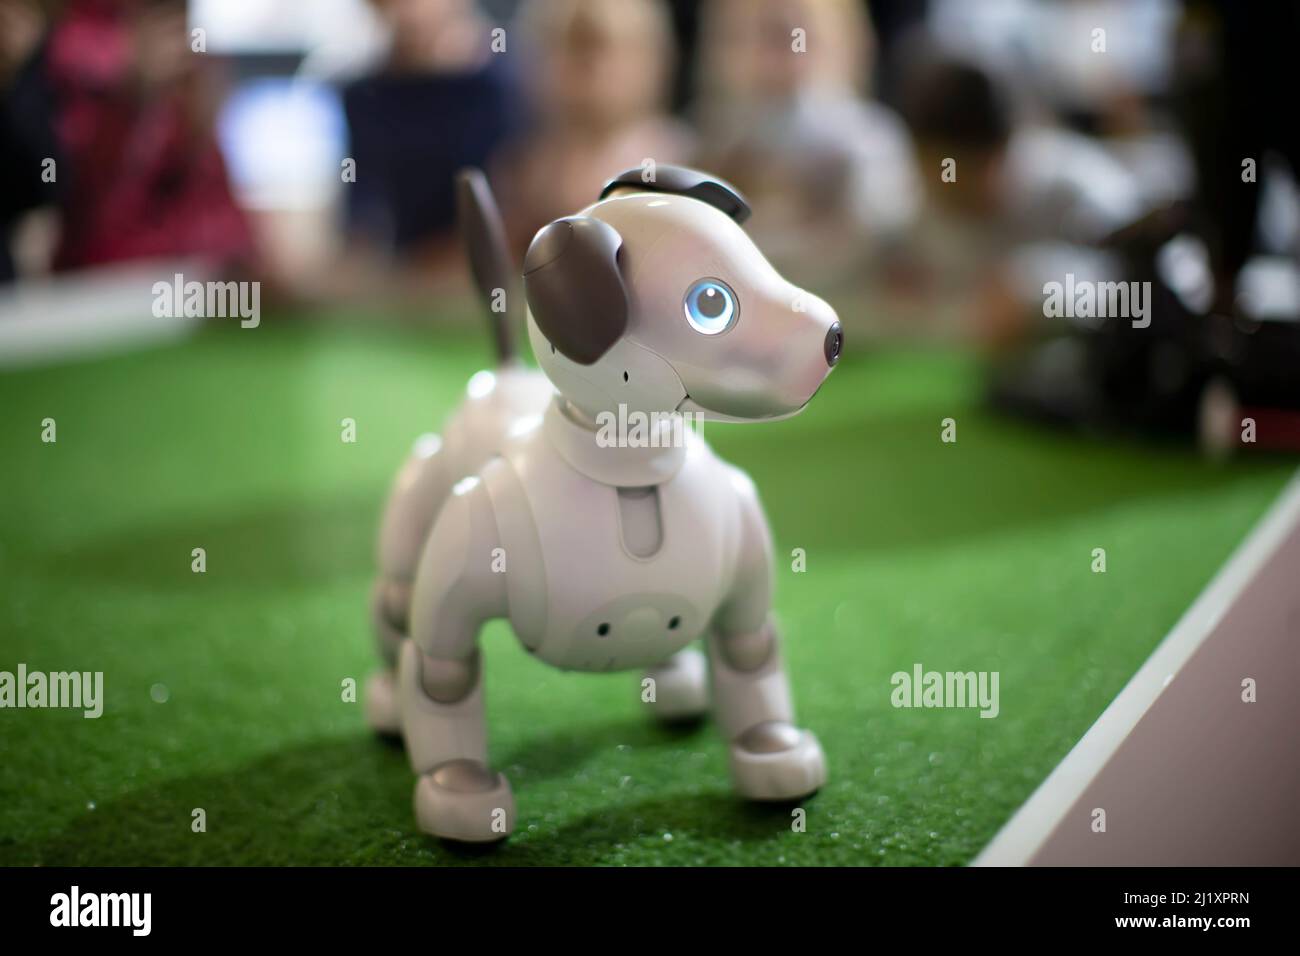 Robot dog stand on the green floor. Stock Photo